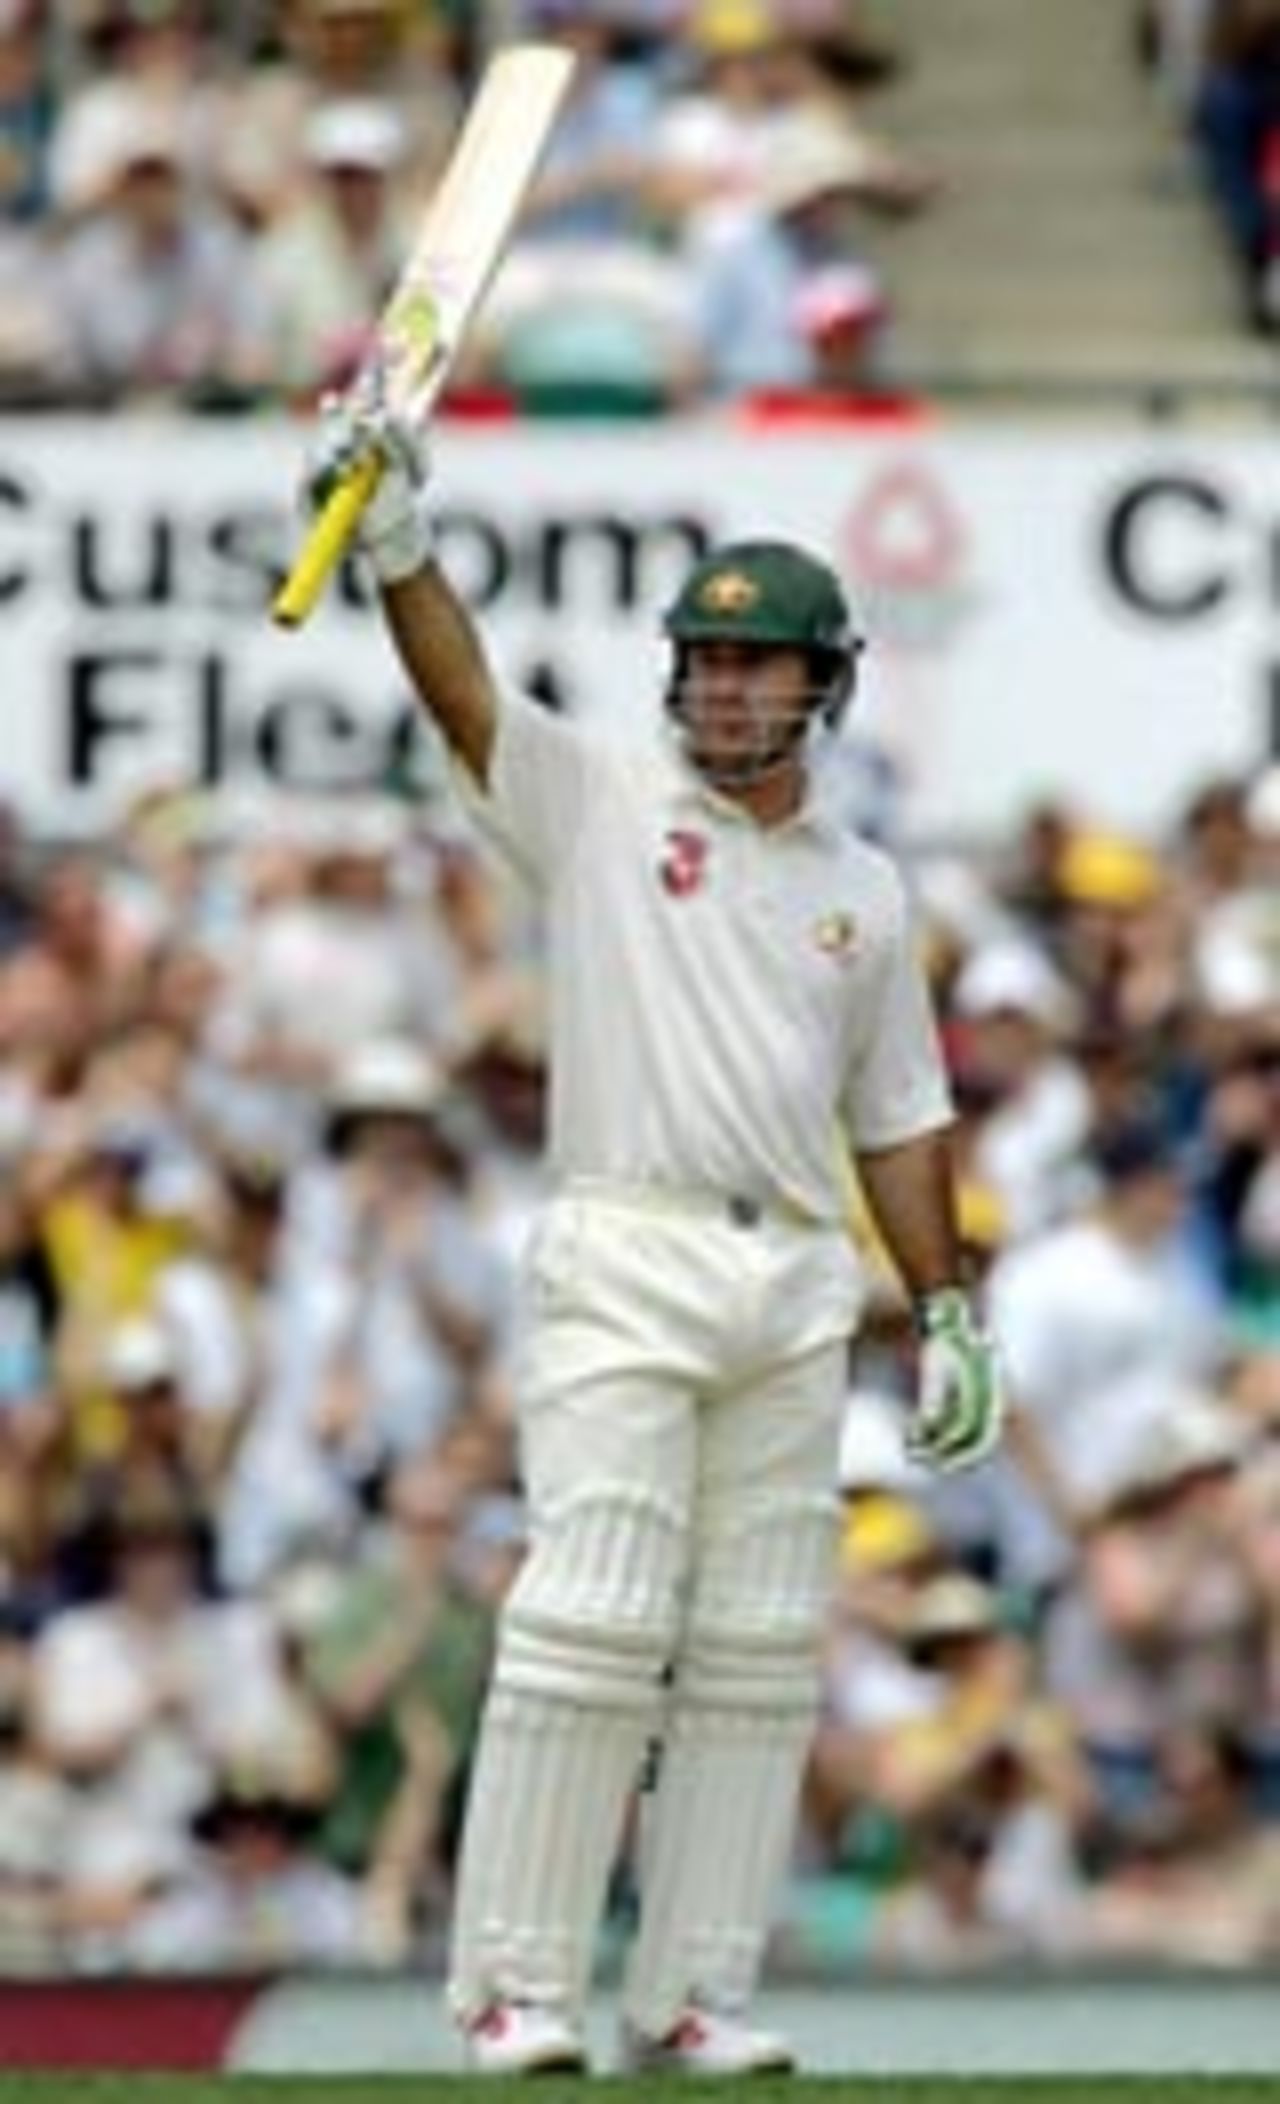 Ricky Ponting acknowledging cheers after his fifty, Australia v Pakistan, 3rd Test, Sydney, January 3, 2005